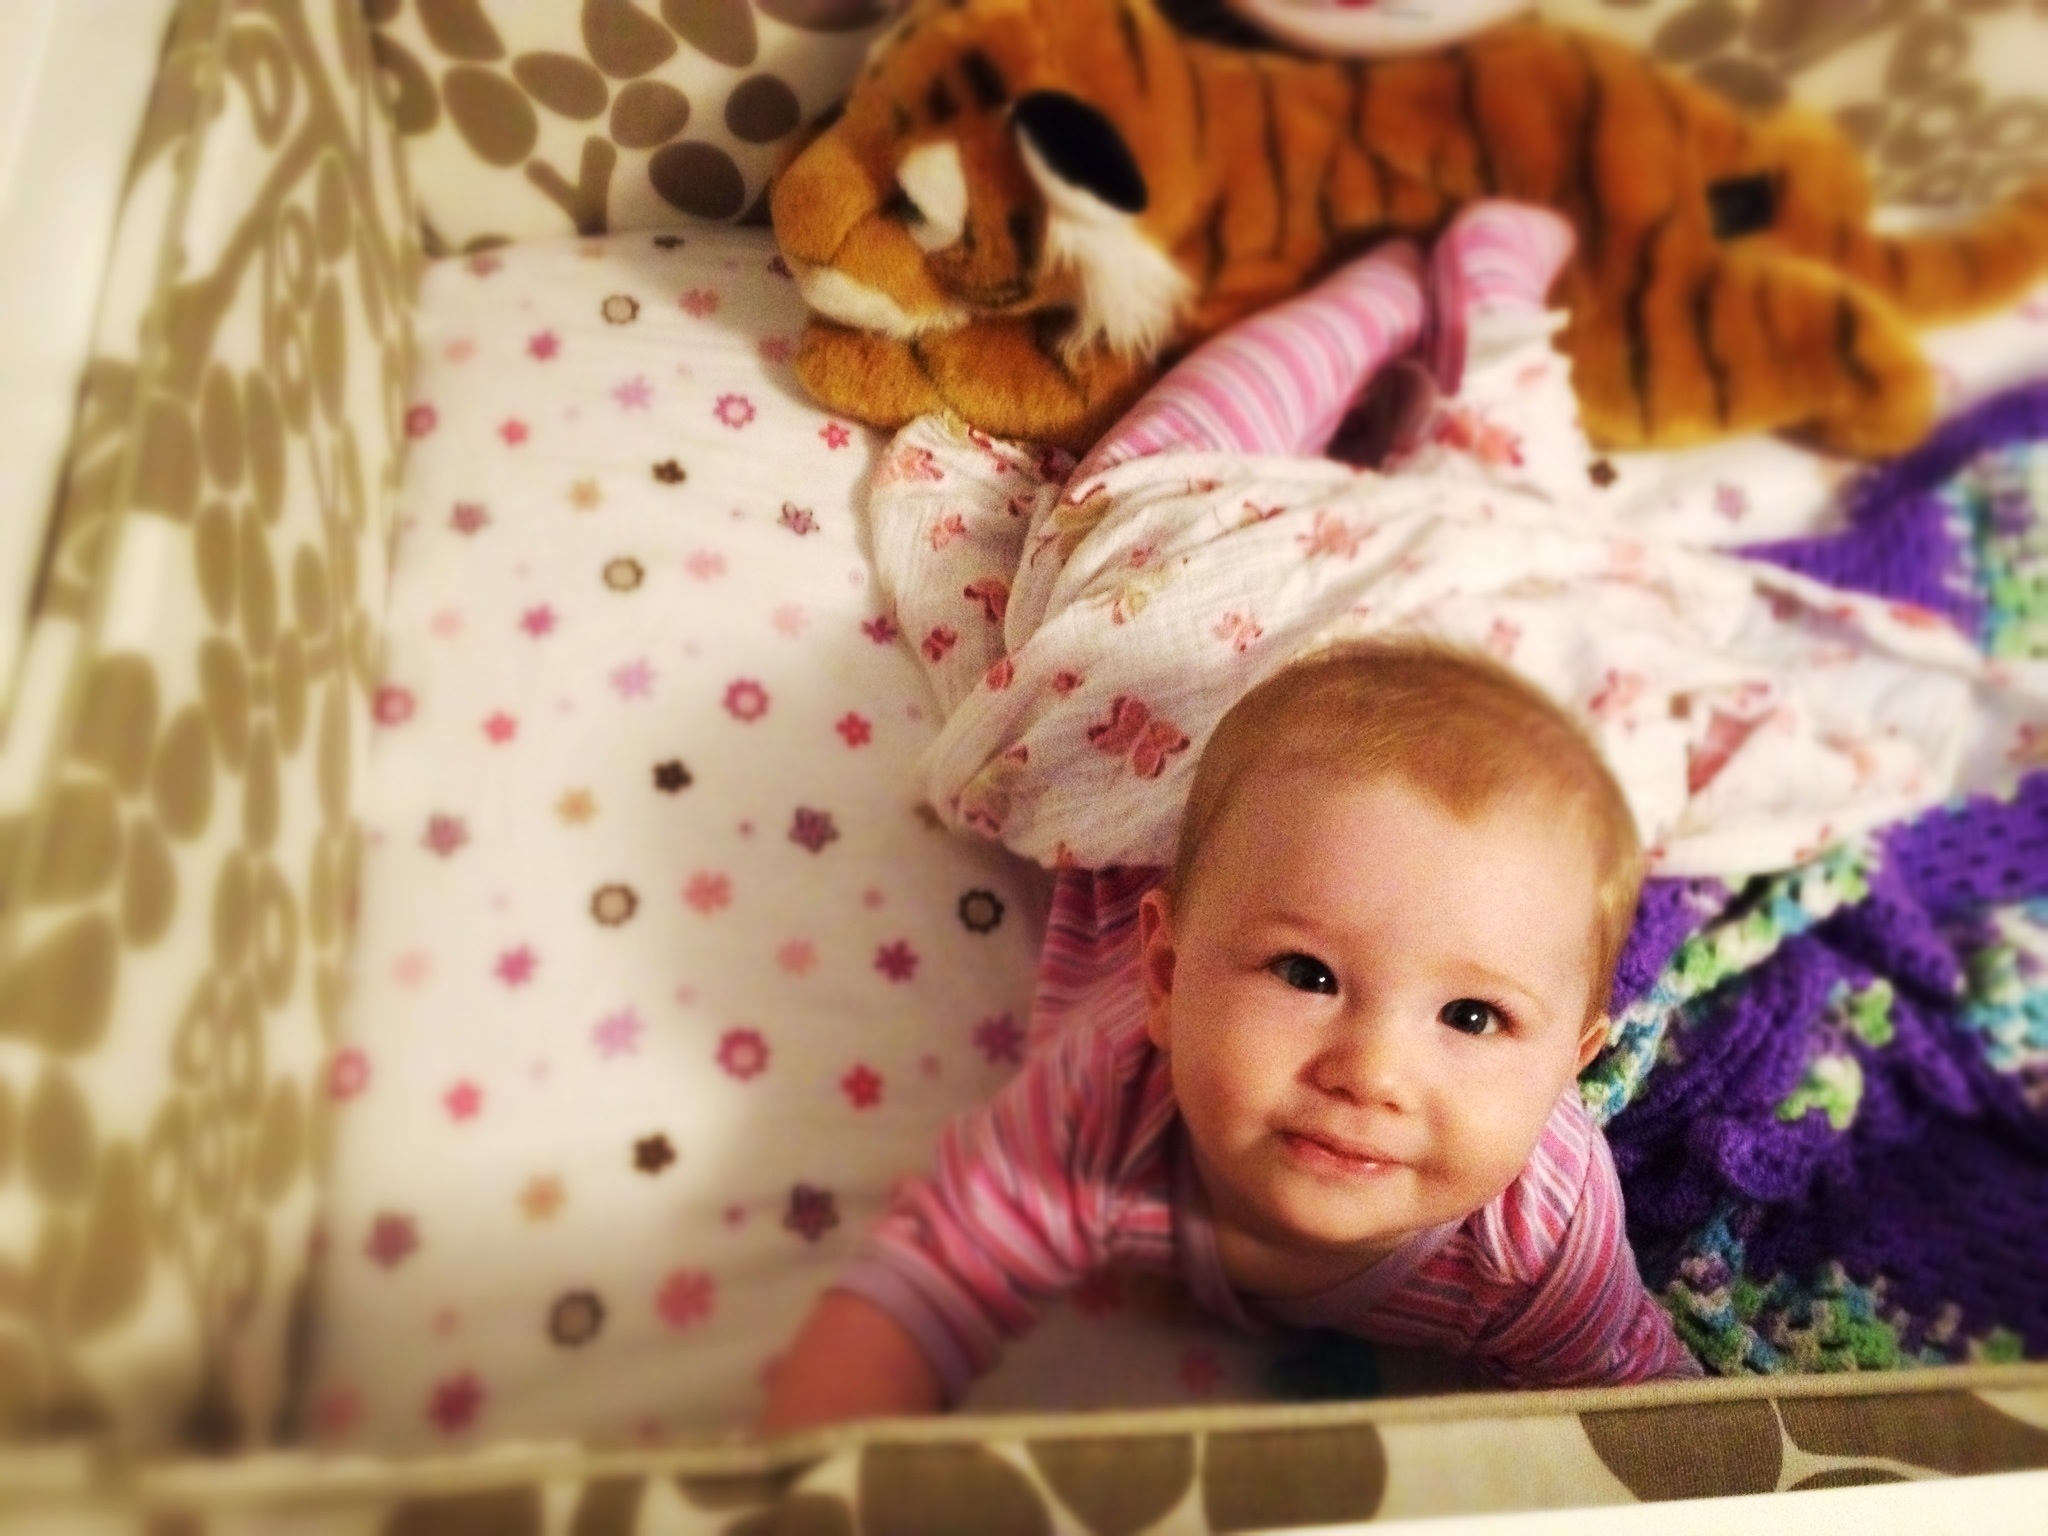 a baby in a crib with stuffed toys